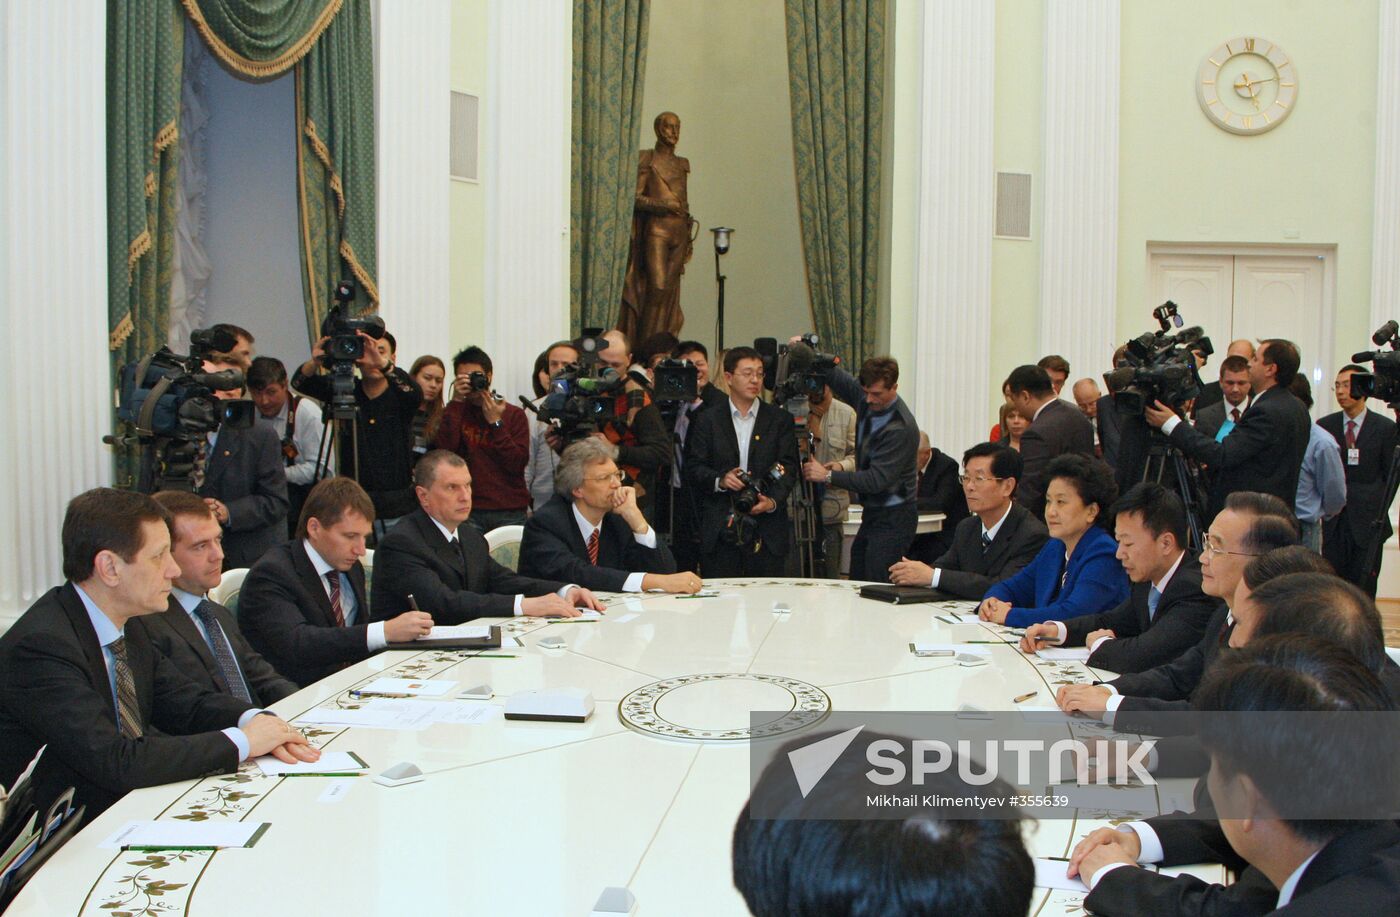 President Dmitry Medvedev meets with Chinese prime minister